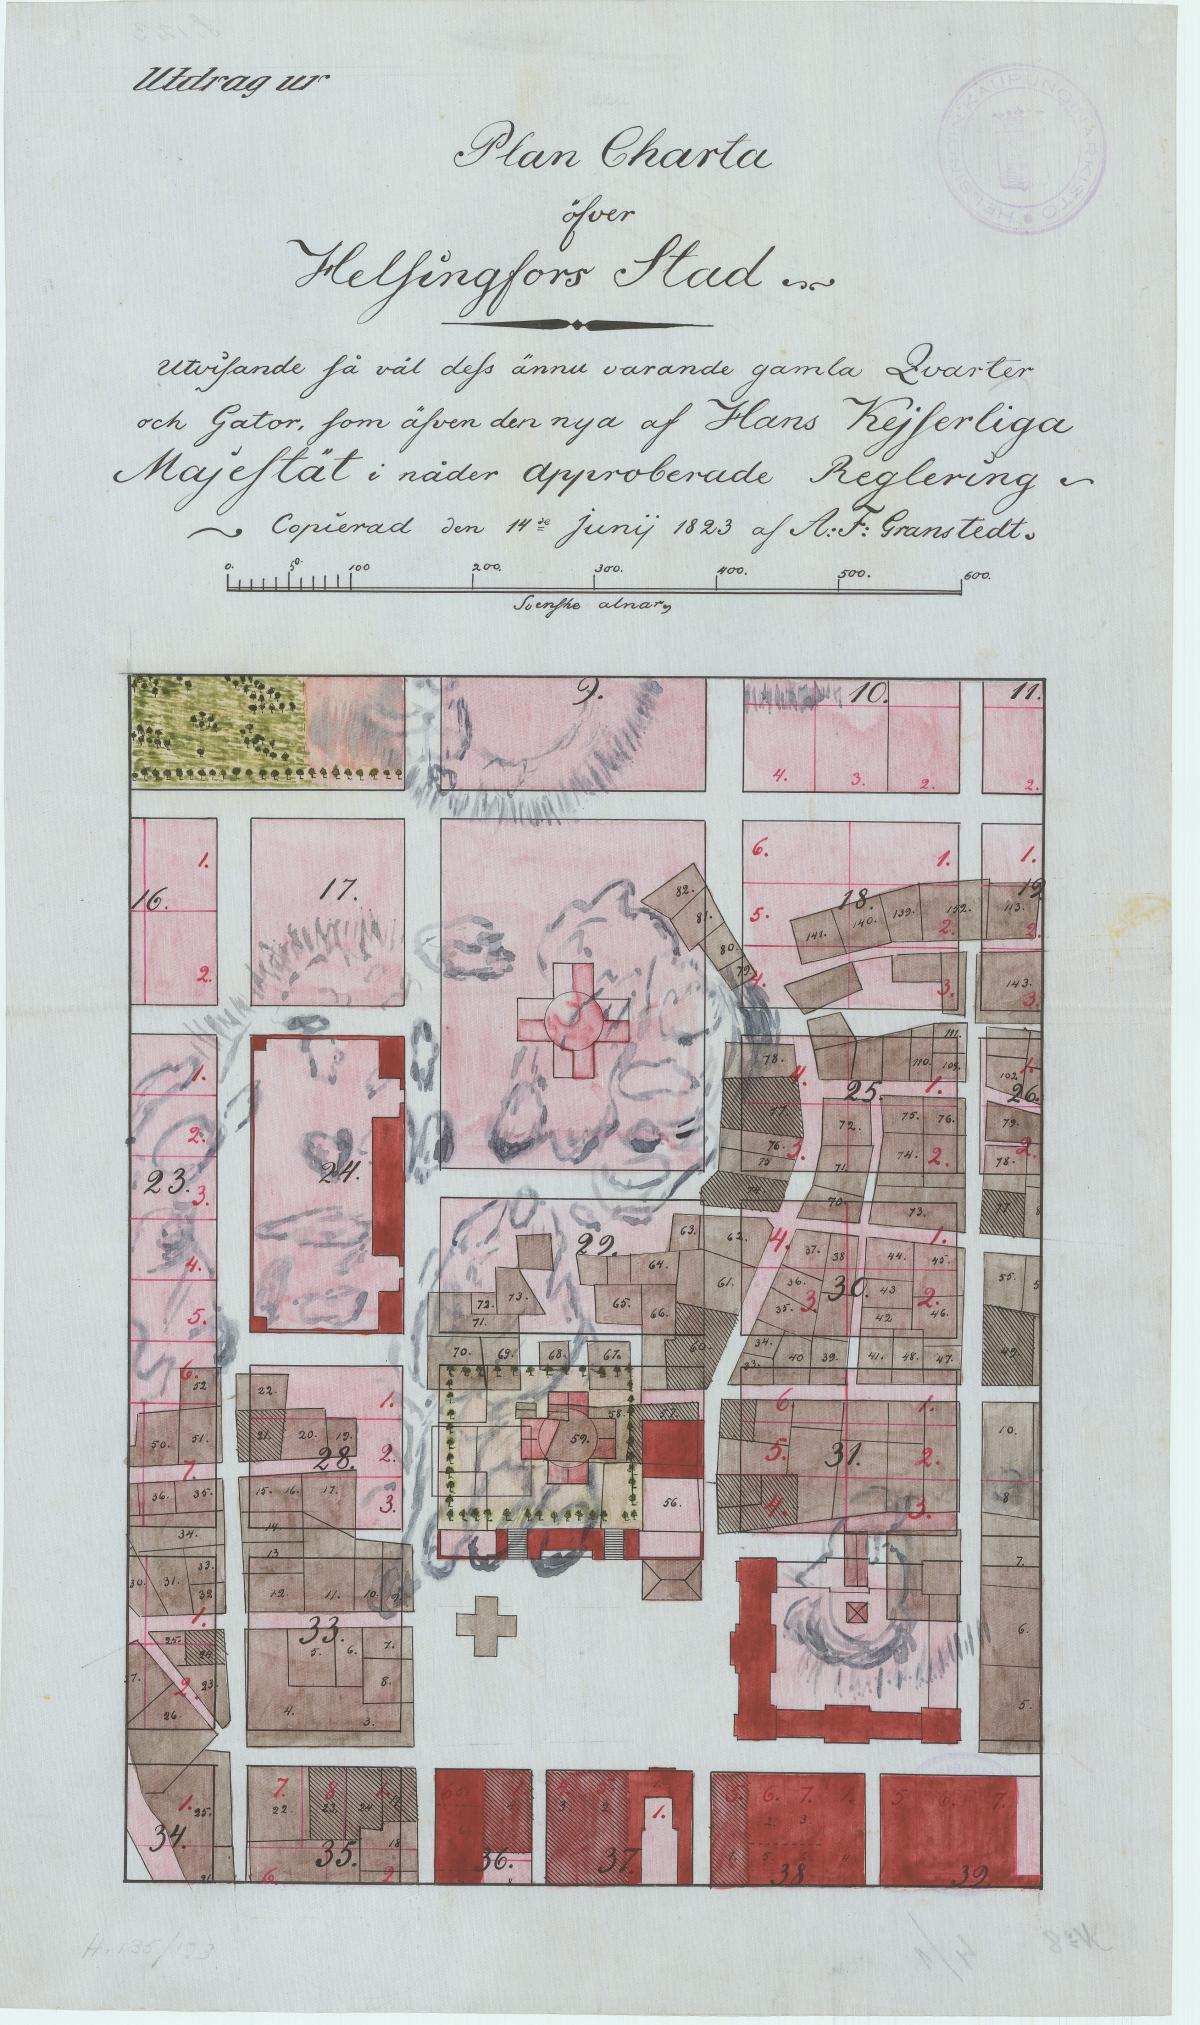 A map of the Kruununhaka district from 1820. The new wider streets and city blocks designed in the new grid plan are drawn in pink on top of the former streets and blocks. The finished areas of the new city plan are marked in dark red. Three church buildings are marked on the map with a cross: Ulrika Eleonora's church on the Senate Square, The Church of St. Nicholas north of the square, and further north a large Orthodox church that was ultimately not built. Instead, a smaller Orthodox church –– the Holy Trinity Church –– was built on the northside of St. Nicholas’s Church, facing the University Library. 
A. F. Granstedt: Plan Charta Över Helsingfors Stad Utvisande Så Väl Dess Ännu Varande Gamla Qvarter Och Gator. Sinetti archive, Helsinki City Archives. 
 Photo: Helsinki City Archives